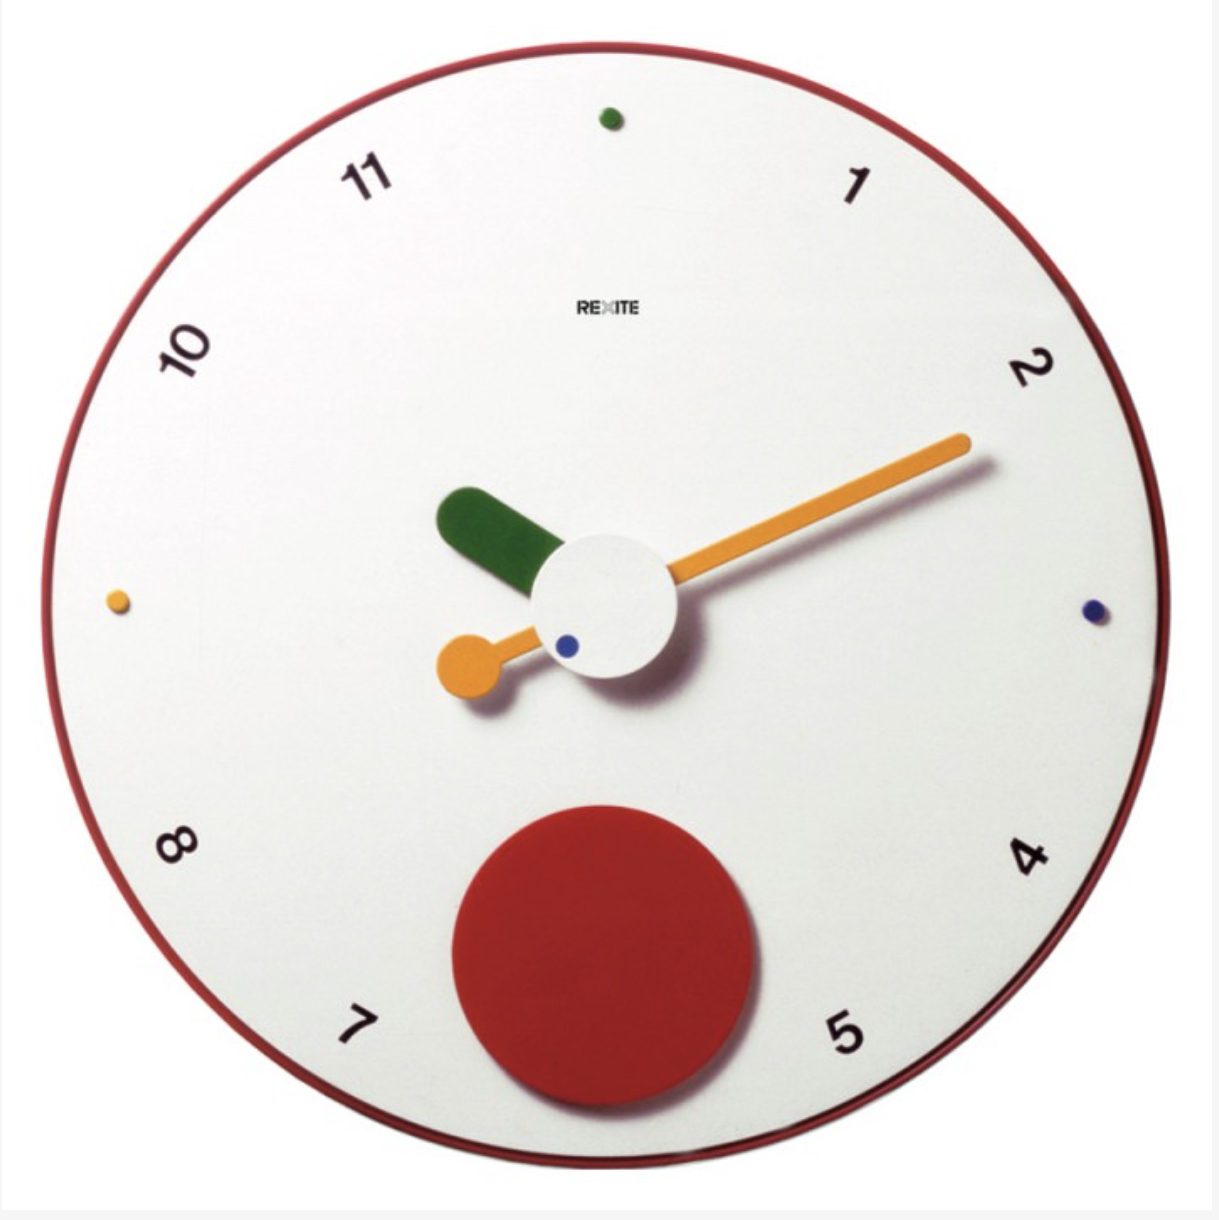 Wall clock CONTRATTEMPO 00.42 by Rexite